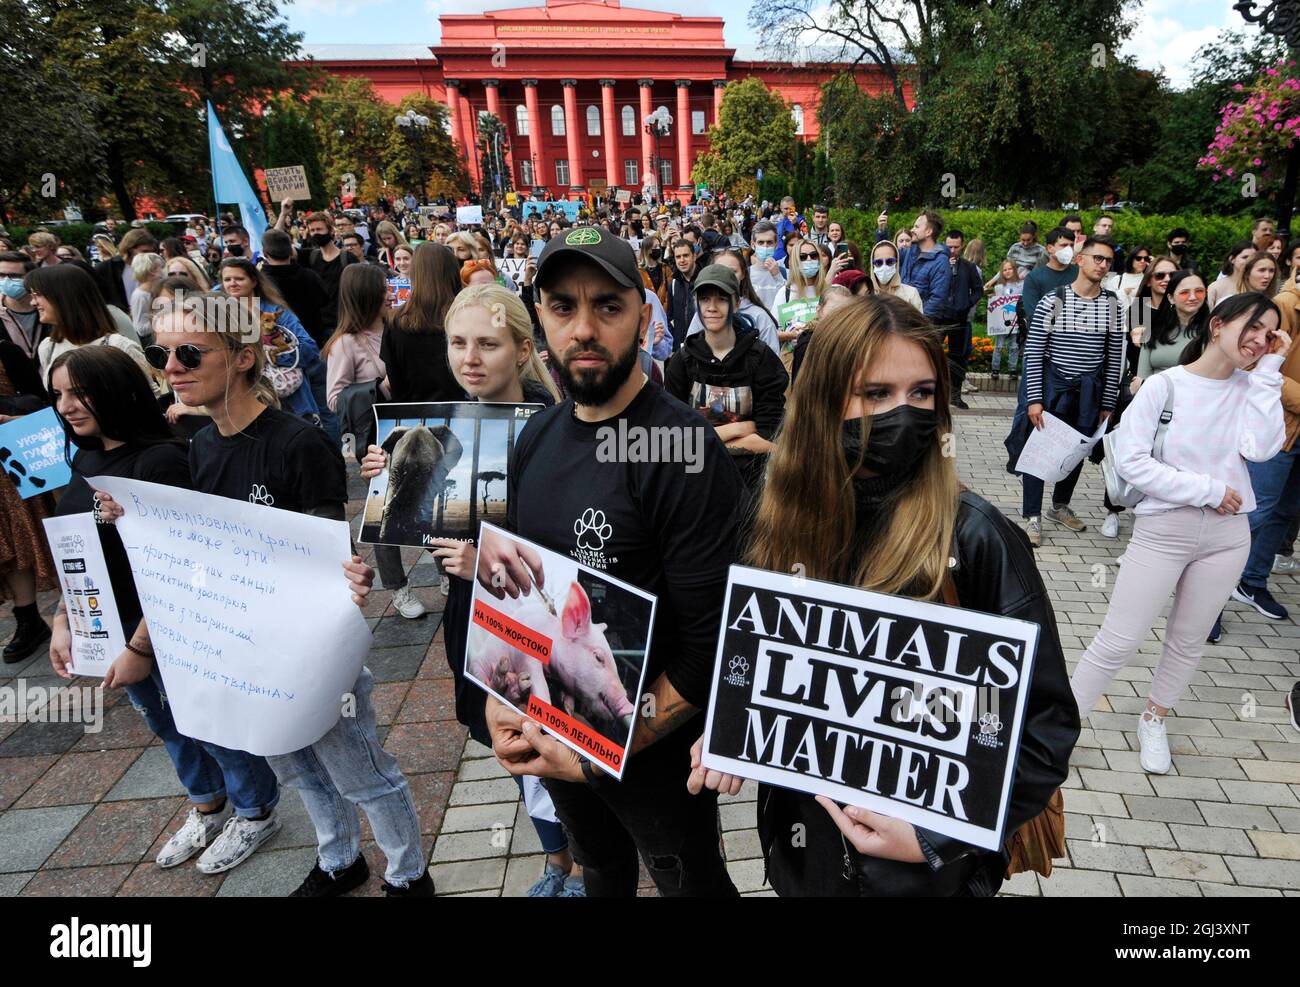 An animal protection activist holds a  placard reading 'Animal Lives Matter' during a rally in Kiev.A march for animal rights was held in Kiev, under the slogan 'Protecting the weak is the business of the strong' to draw the attention of the authorities to the need to protect animals. Animal rights activists demand a ban on hunting, animal testing of cosmetics and household chemicals, and the closure of petting zoos, fur farms and dolphinarium. (Photo by Sergei Chuzavkov / SOPA Images/Sipa USA) Stock Photo